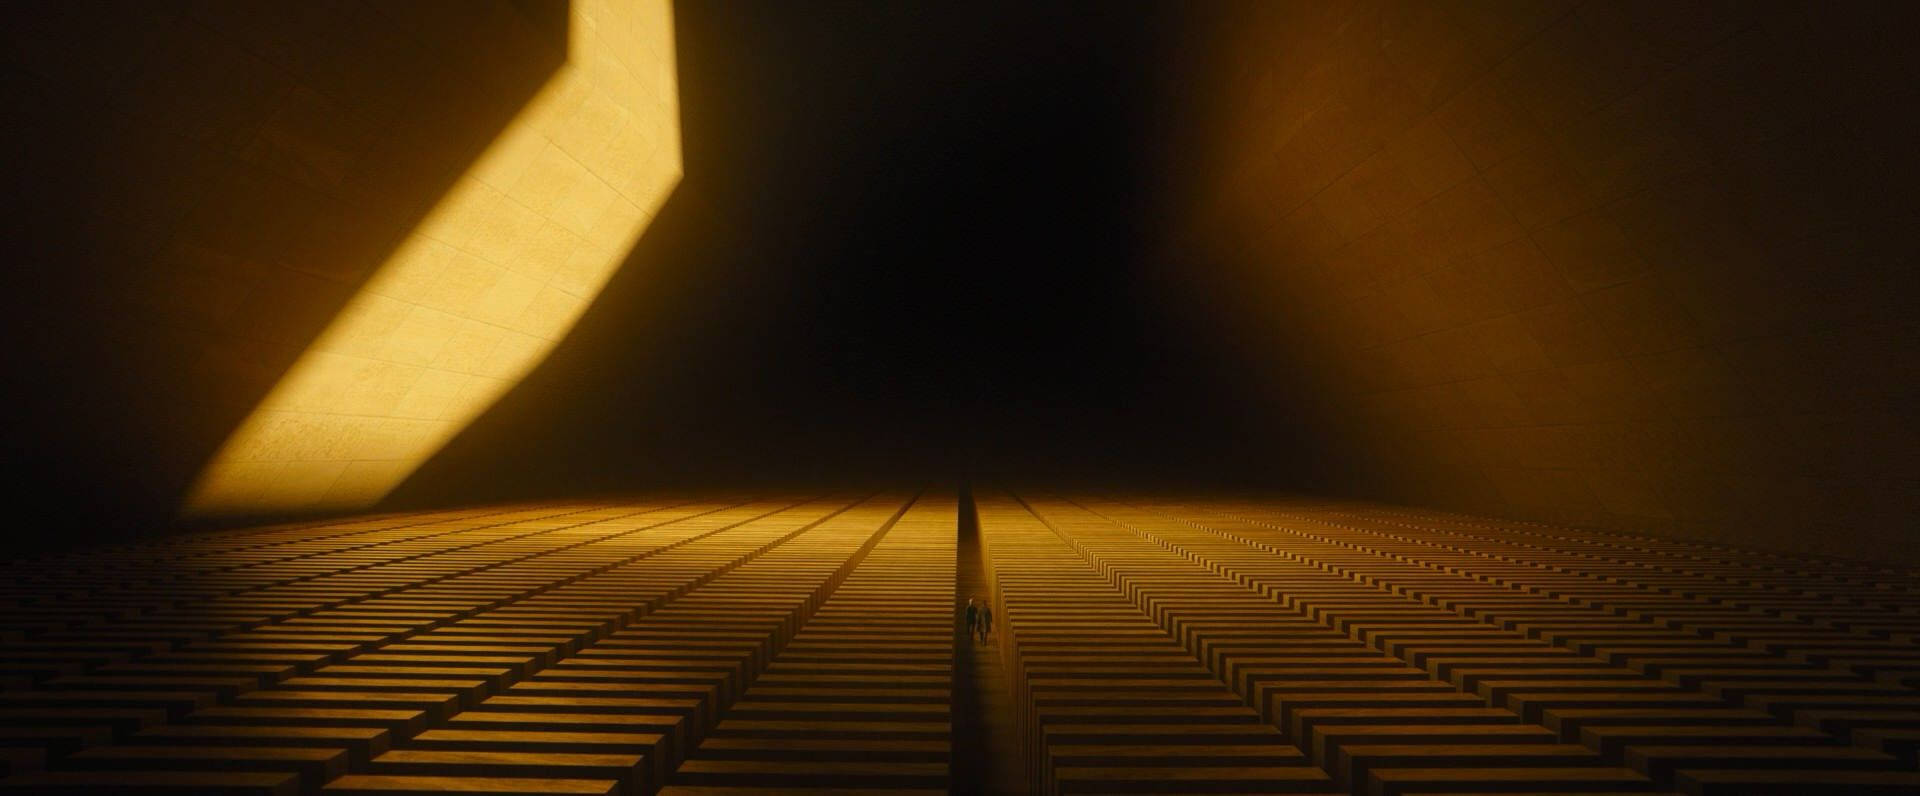 Blade Runner 2049 Rows Of Archives Background